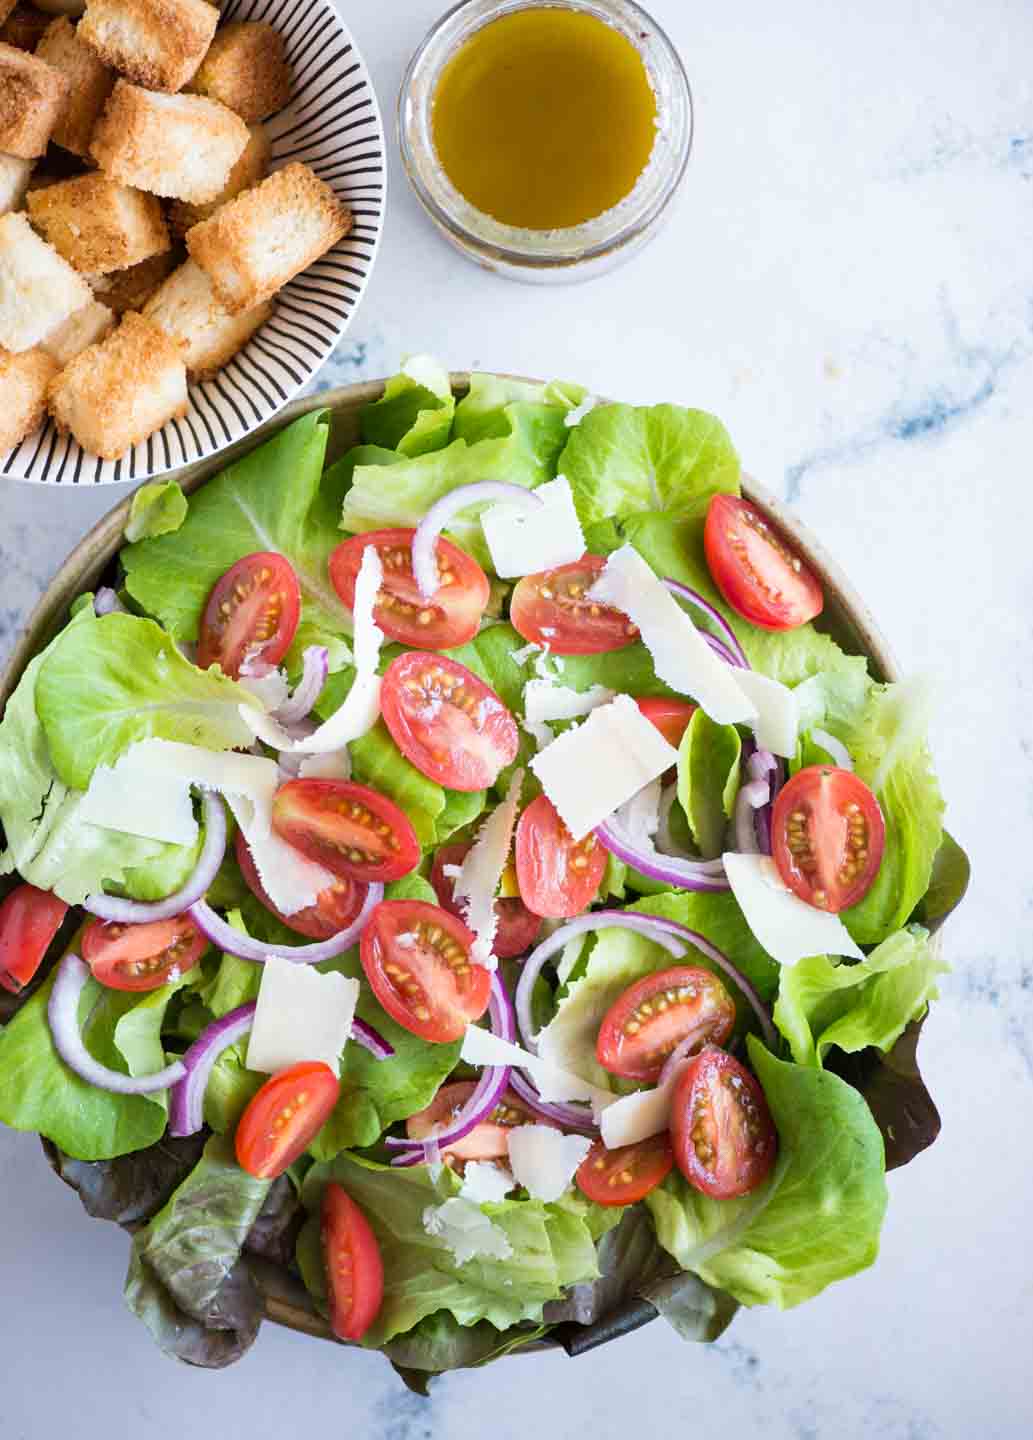 There is something so satisfying about this Italian Chopped Salad. Fresh greens, Tomatoes, Onions tossed in a light vinaigrette. A Simple salad that you can serve with any meal.